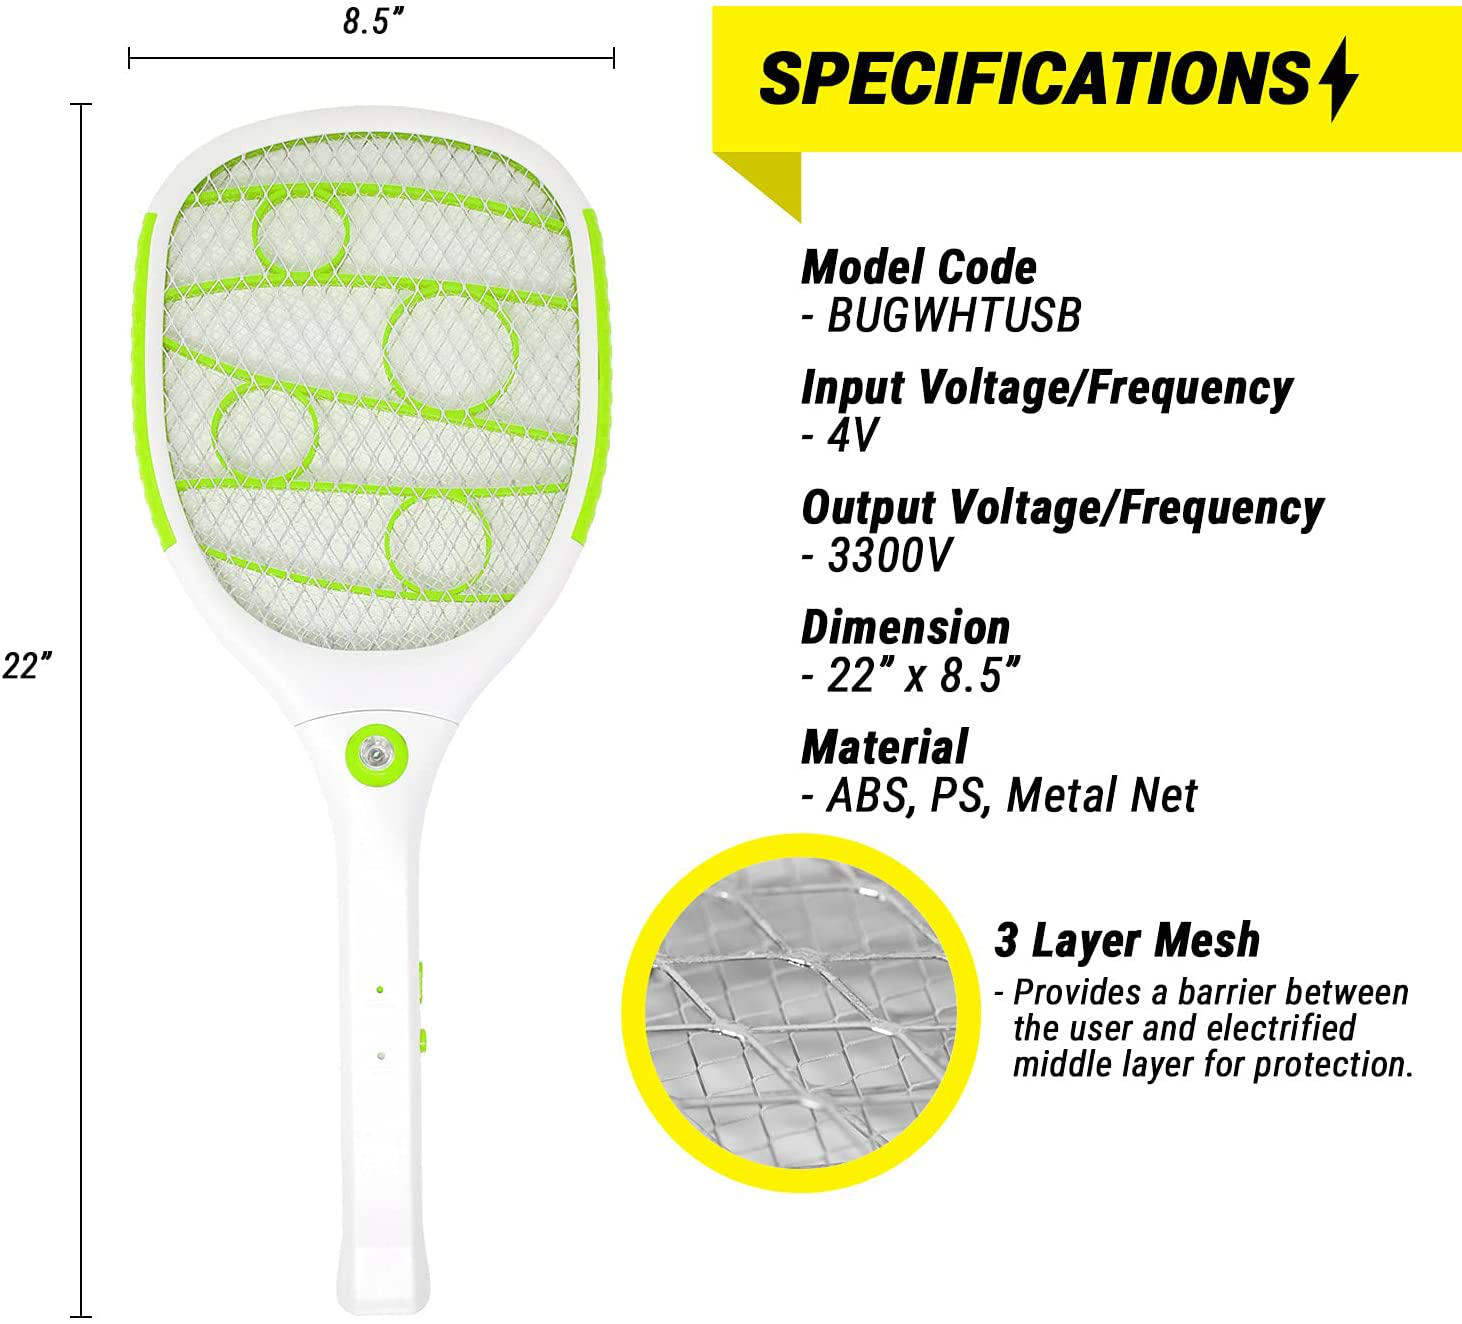 2PK of USB Rechargeable Electric Bug Zapper 3300V, Mosquito Killer Racket, Rechargeable Battery Powered Fly Swatter with LED Light for Flys, Bees, Mosquitoes and More (Green)